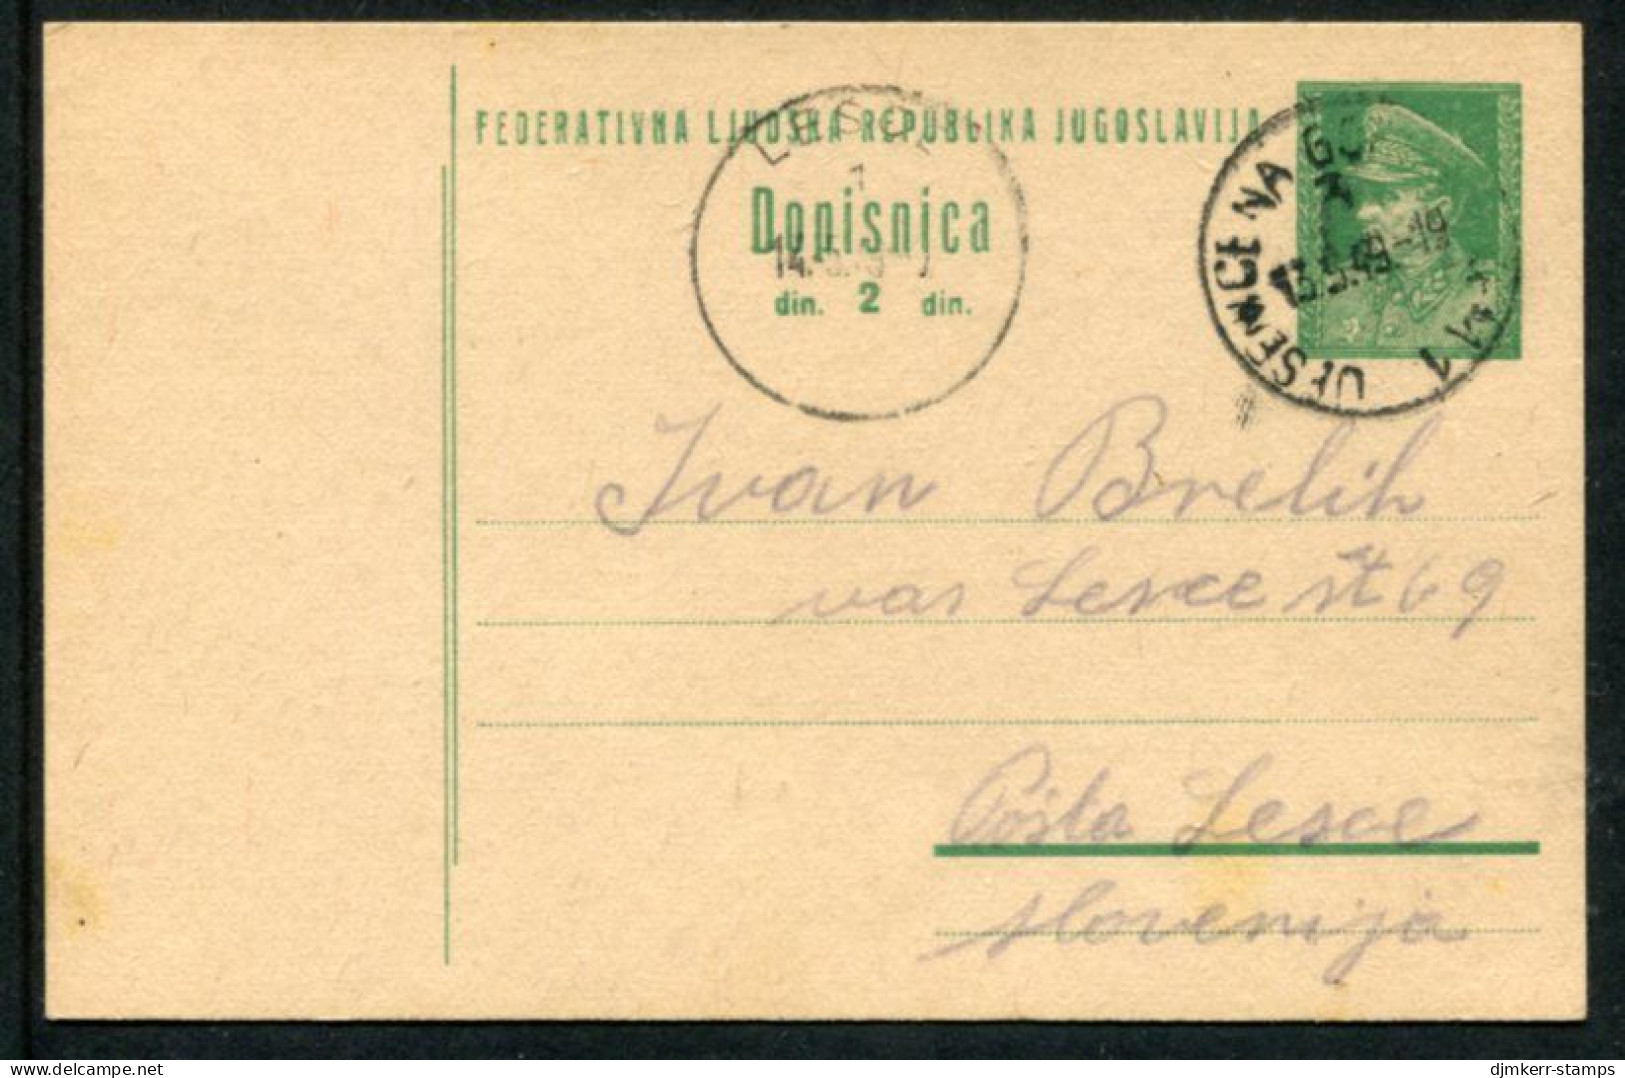 YUGOSLAVIA 1948 Tito 2 (d) Postal Stationery Card  With Text In Slovene, Used.  Michel P126 - Entiers Postaux